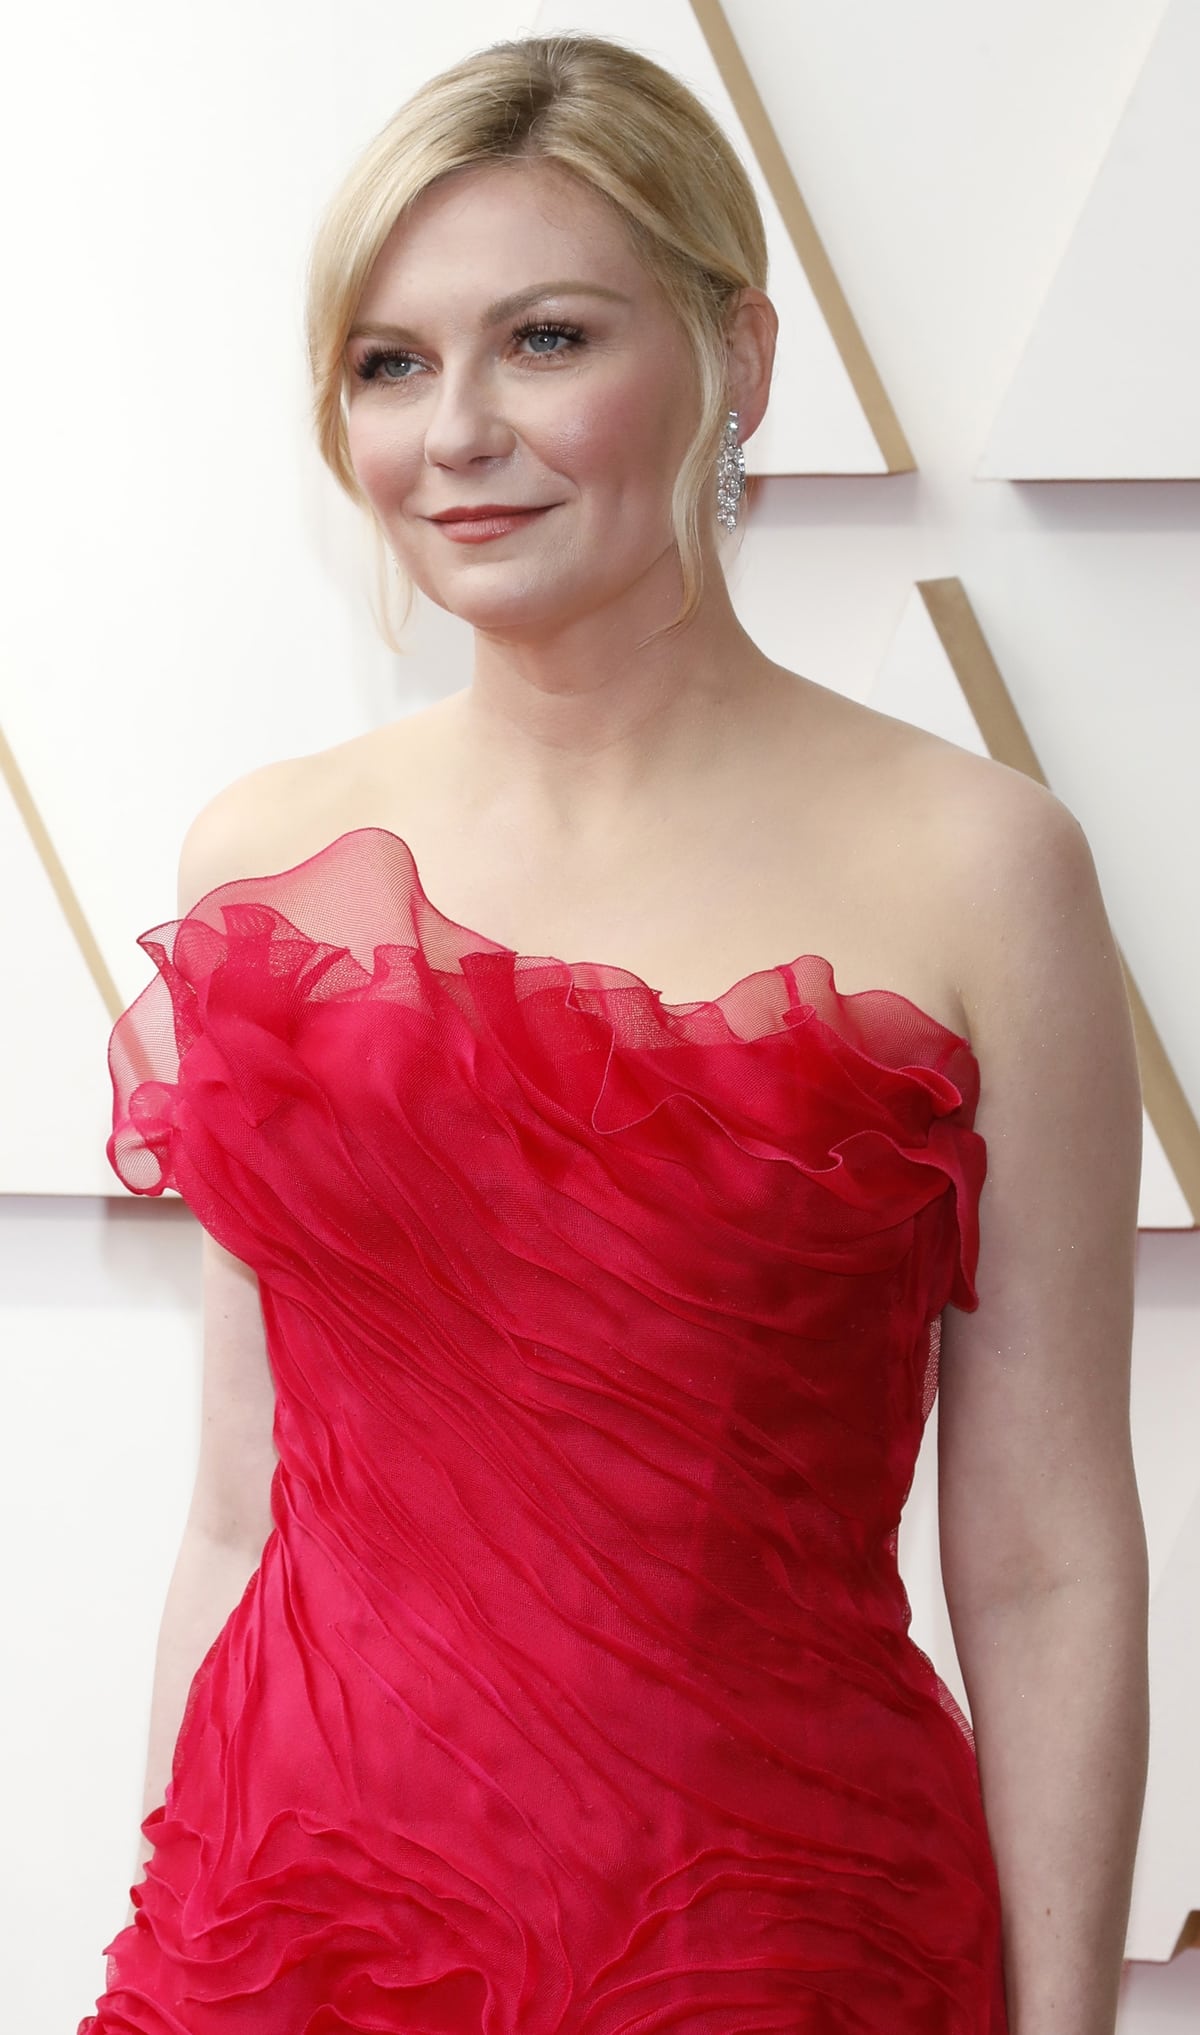 Kirsten Dunst styled her red dress with Fred Leighton Marquise and baguette diamond earrings by Sterle Paris